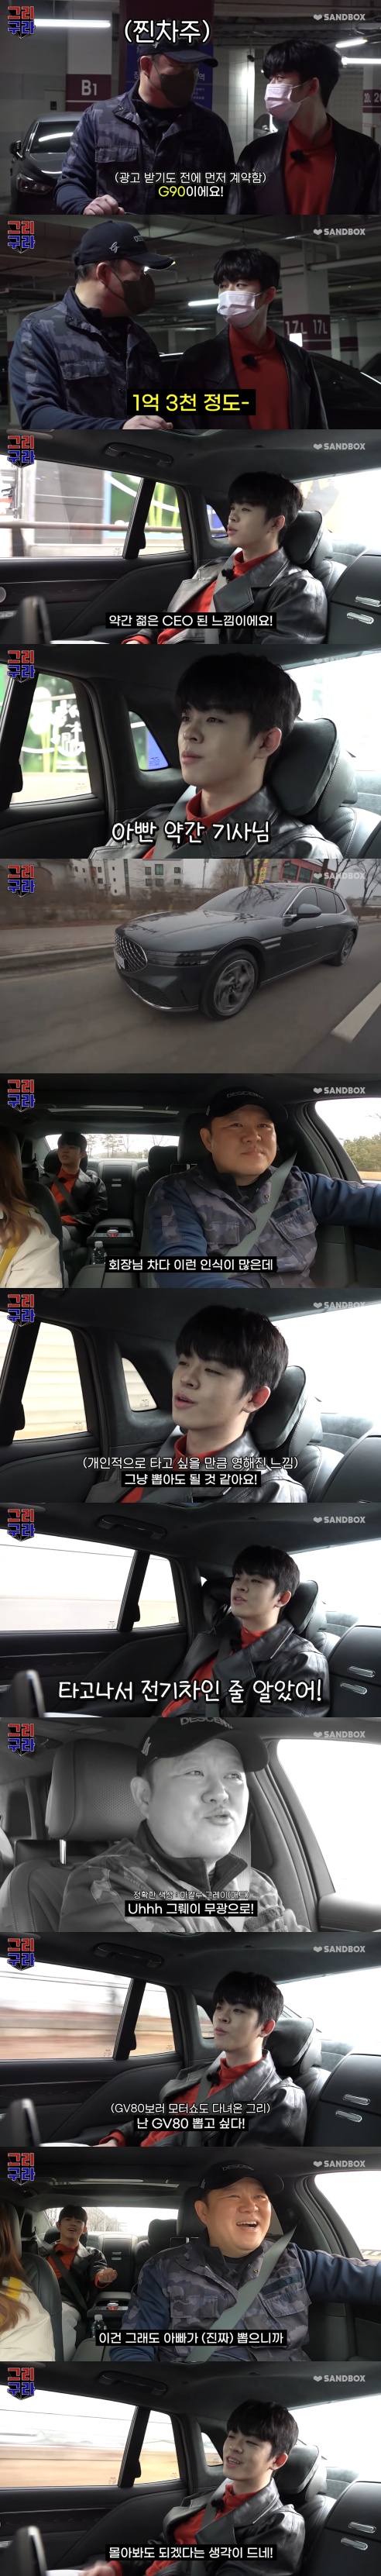 Broadcaster Gim Gu-ra (real name Kim Hyun-dong and 51) boasted of the new car.On the 25th, YouTube channel Grigura, What kind of car will Gim Gu-ra actually ride? Gura unveils 100 million dollars of cars!FLEX Shopping Date!!!!! The reaction of the chairman in the G90 car was ..? Ive pulled out a gura tea ~ Im going to release a 130 million guras NEW ama!The video, which had been expected with the warning, began with Gim Gu-ra and his son Gri (real name Kim Dong-hyun and 23) in a car for a special date.On the day, Gim Gu-ra said he recently bought a company H car; in May, he said his name was five cars; Gim Gu-ra said, Its my follow-up car.The car is coming out soon, but it (I have a test drive) went well; the car I bought was about 130 million with all the options.I feel like a young CEO, Father is a knight, Grie said in the back seat, admiring the comfort of the cushion.I have a lot of awareness that this car is your car, but now that Im in it, I think I can just pick it if I have time.I thought it was an electric car, just to add a little exaggeration. I think Im lying in a hammock.Gim Gu-ra said he actually picked his car gray matte and made it the best option.I told him that I wanted to pick the GV80 on the air, but I think I can drive it because I also picked it and Father picked it.I slept if I had not had a camera, I really did. Meanwhile, Gim Gu-ra remarried a 12-year-old non-entertainer woman in 2020 and held her late daughter in her arms last year.